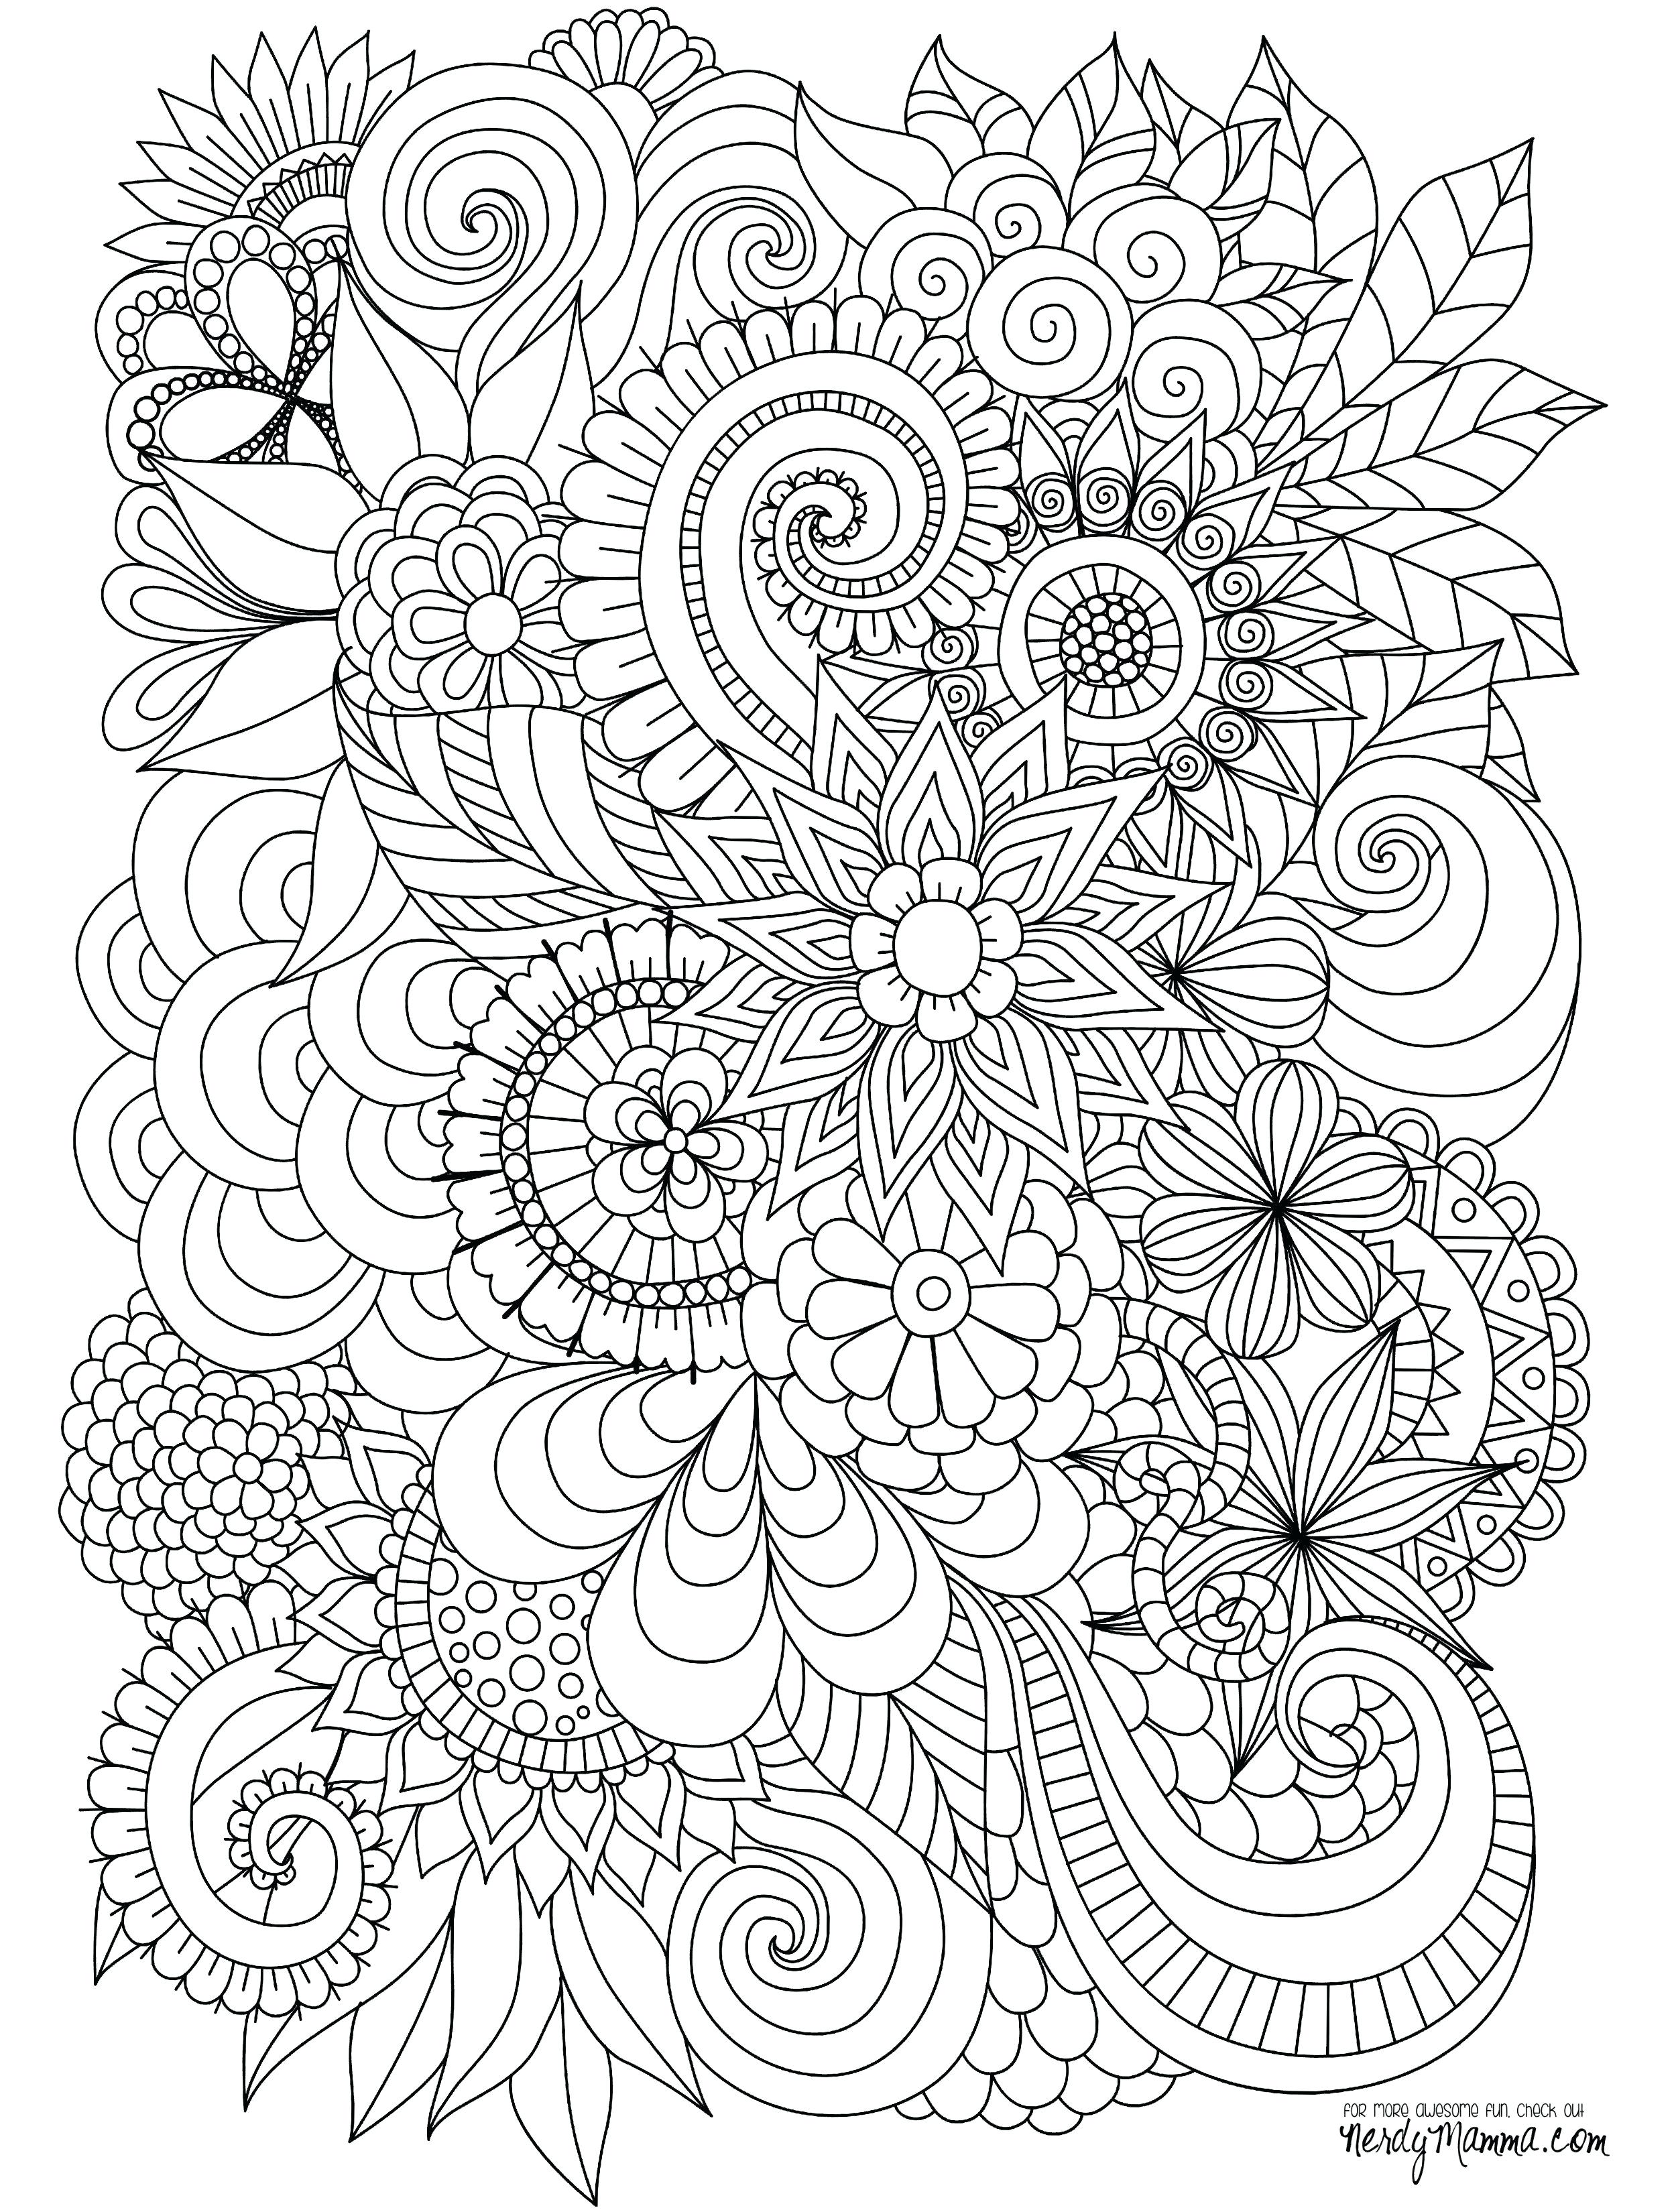 Coloring Pages : Design Coloring Pages Flowers Hard Abstract ...